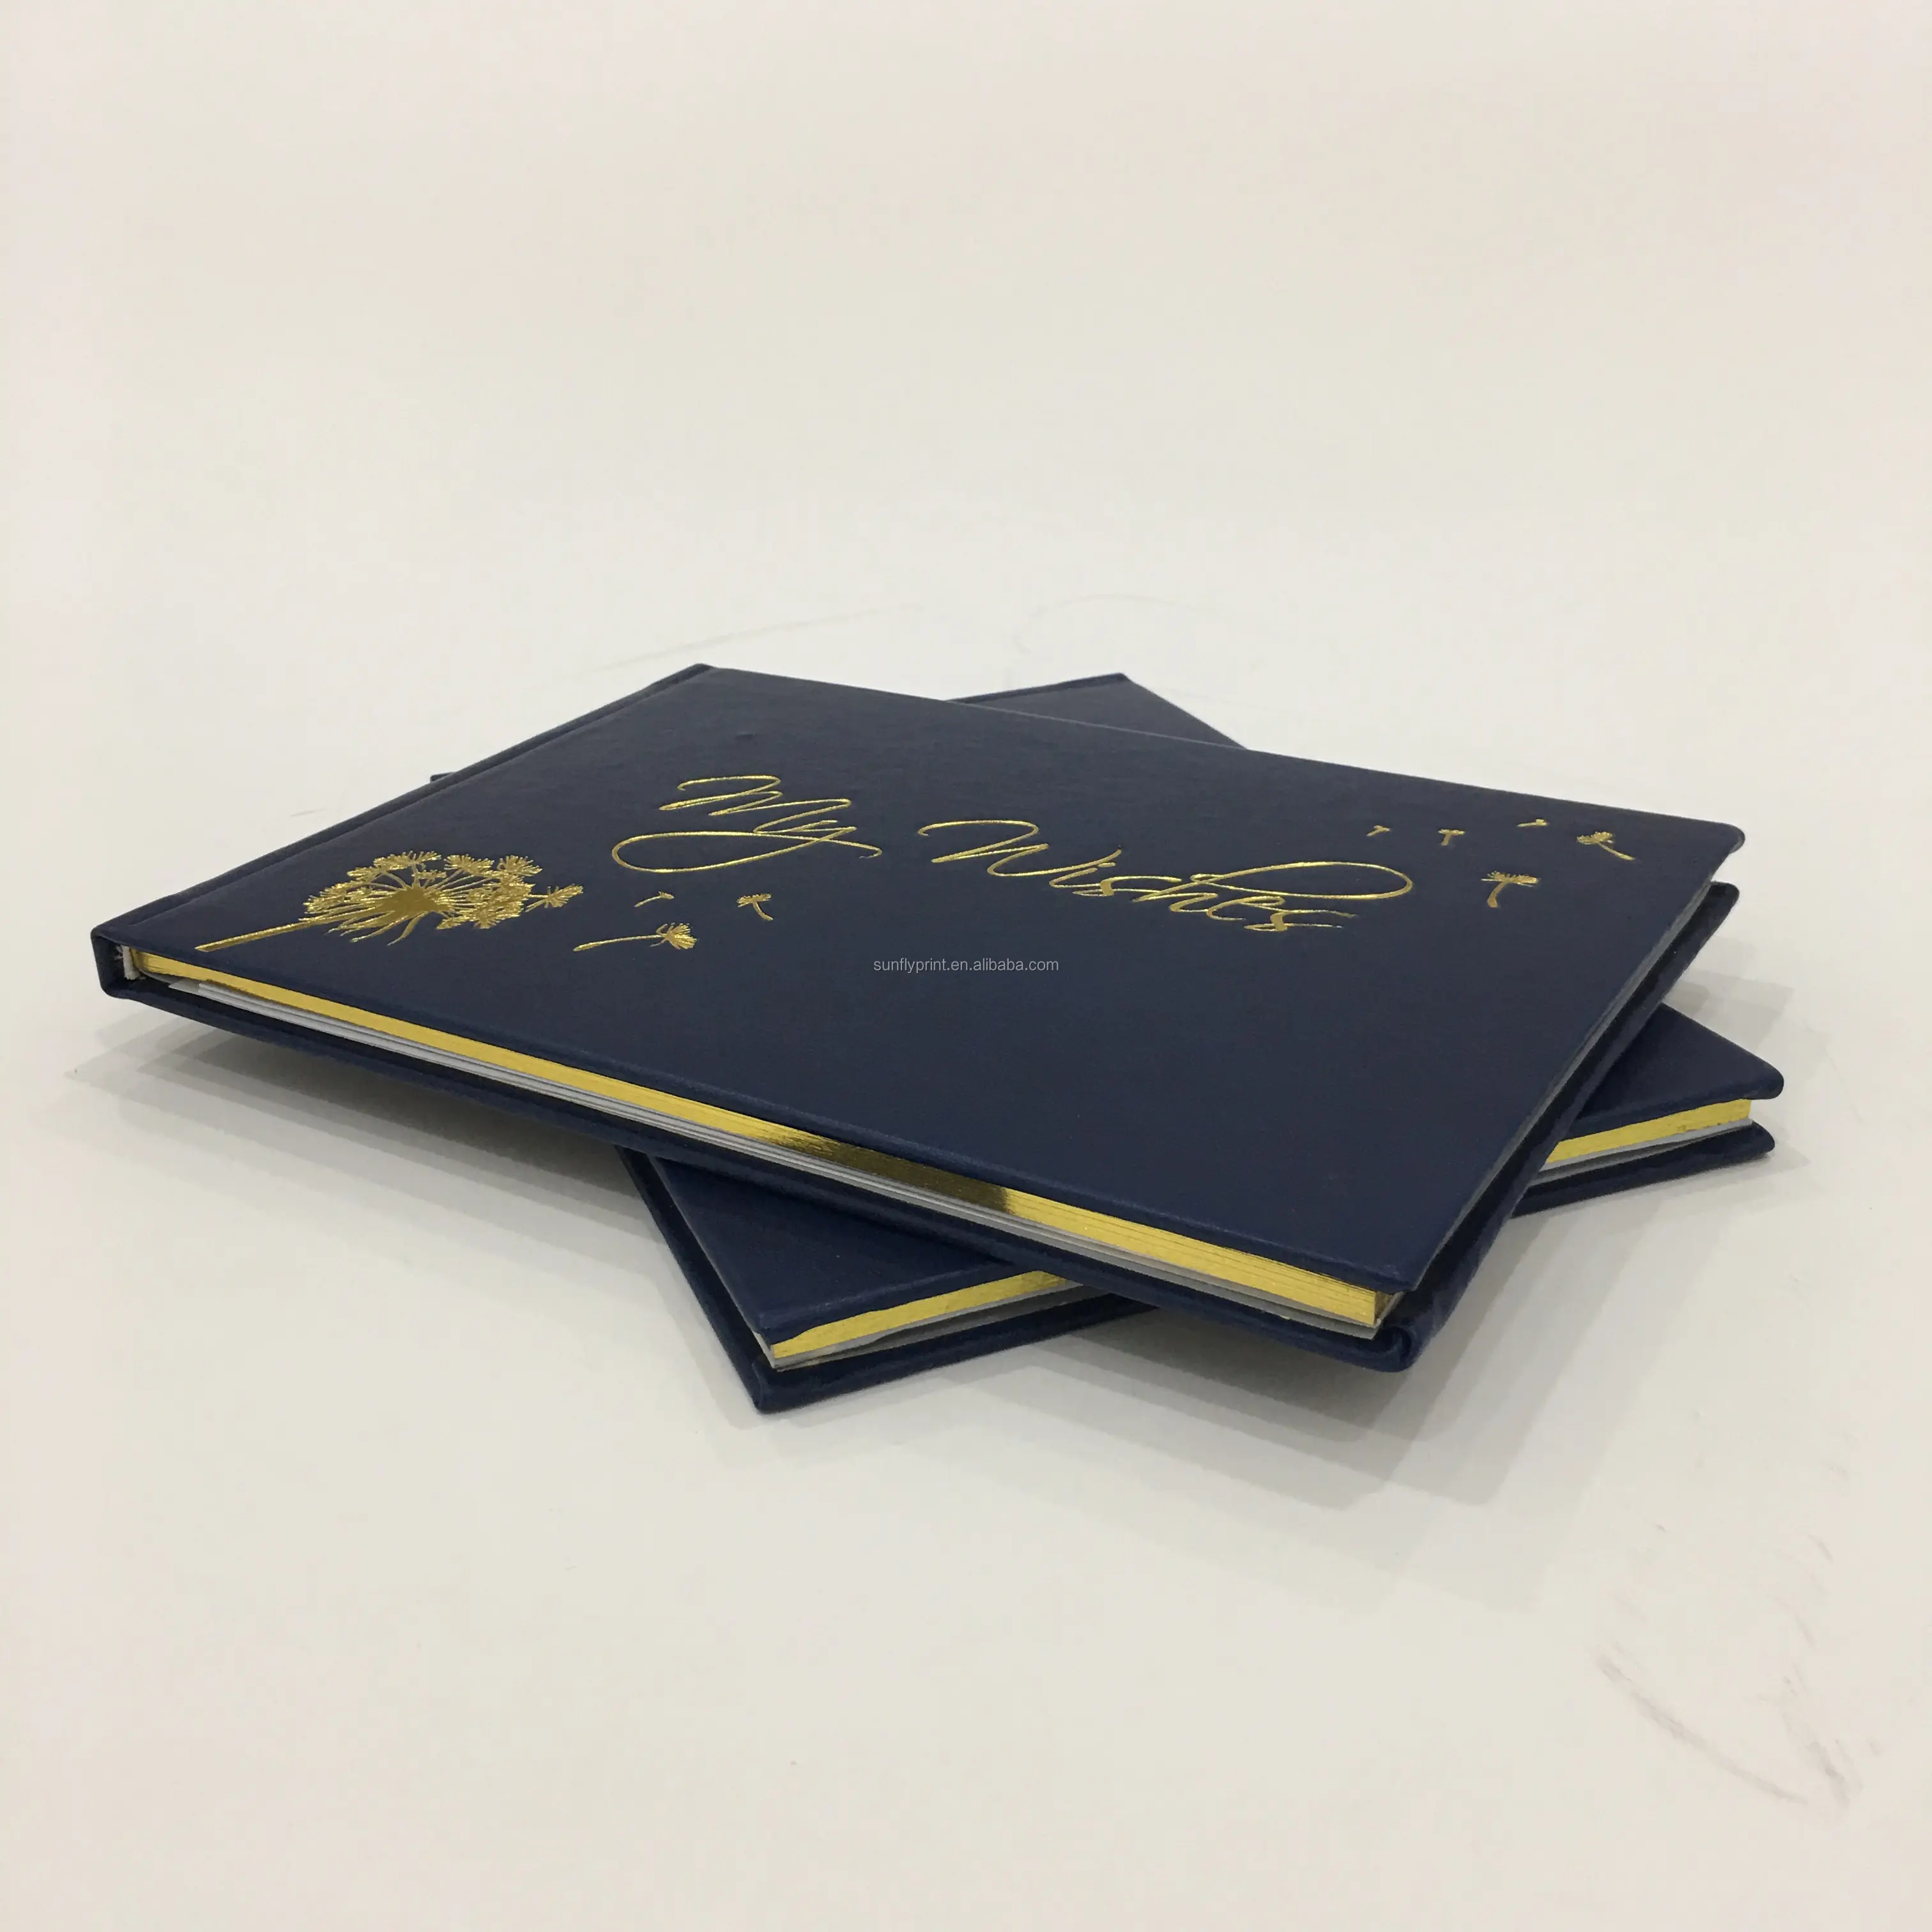 High quality note book printing and gold foil embossed logo on leather cover with gold edges printing